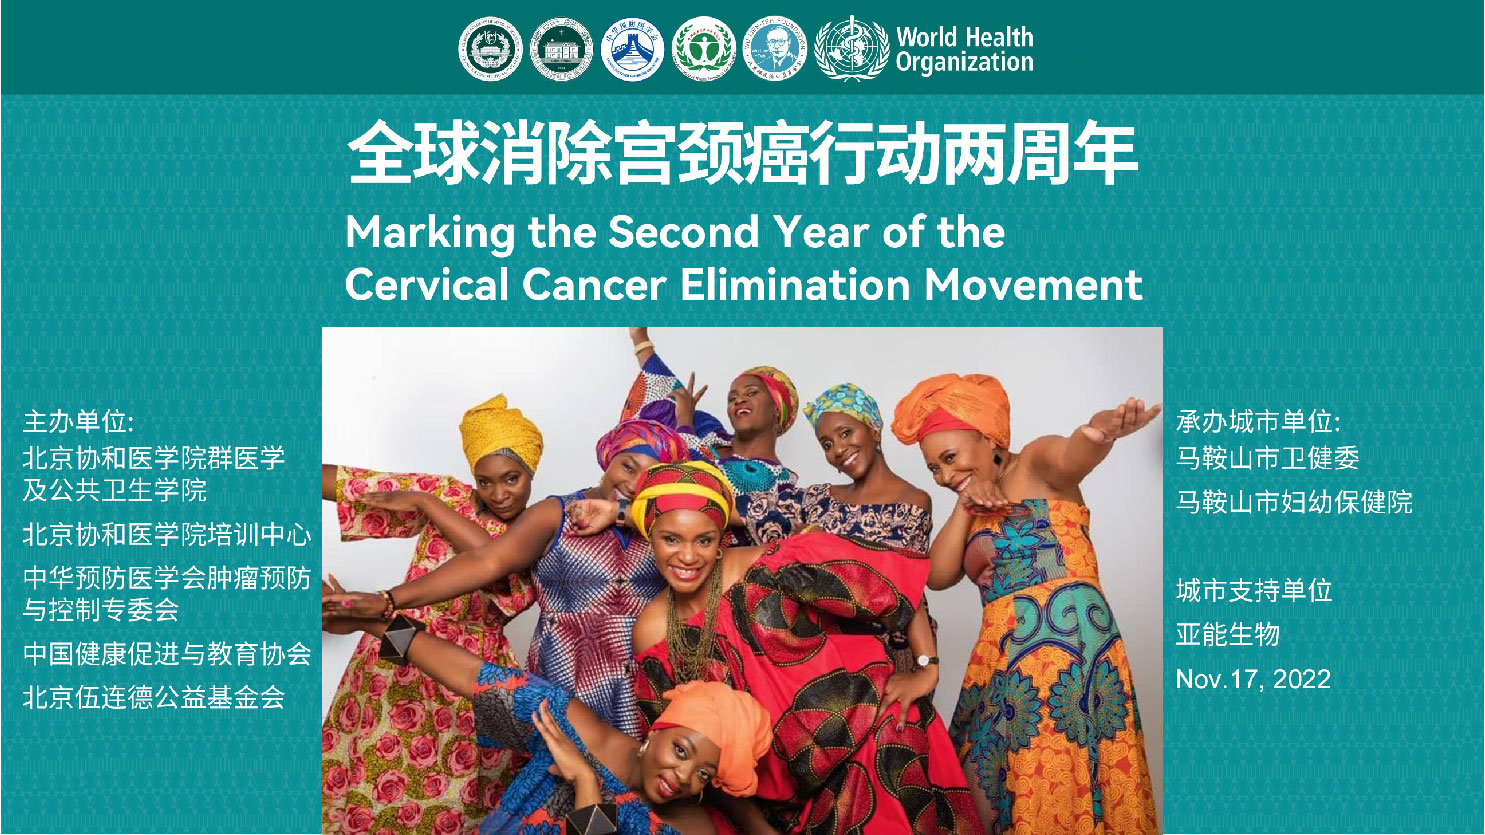 Second anniversary of the Global Action to eliminate Cervical Cancer